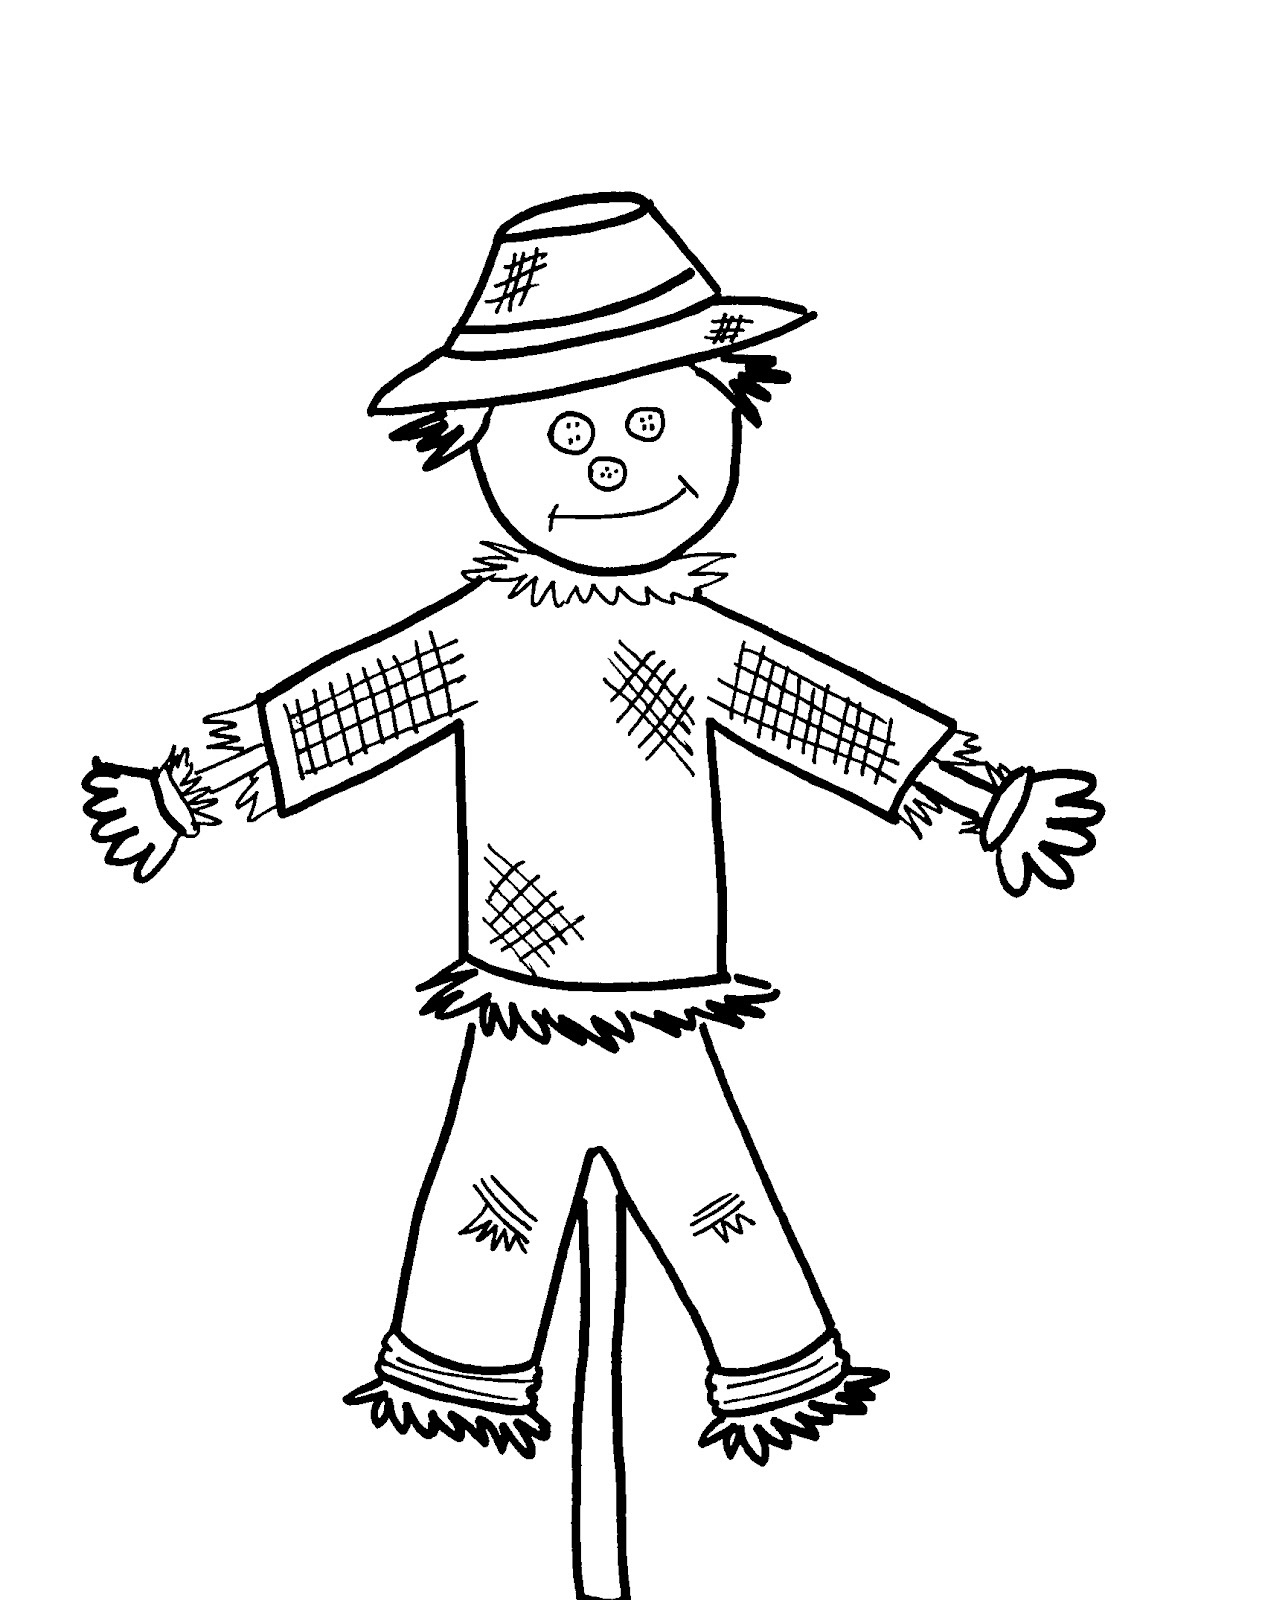 scarecrow-printable-download-the-color-by-number-dot-to-dot-build-a-scarecrow-wordsearch-and